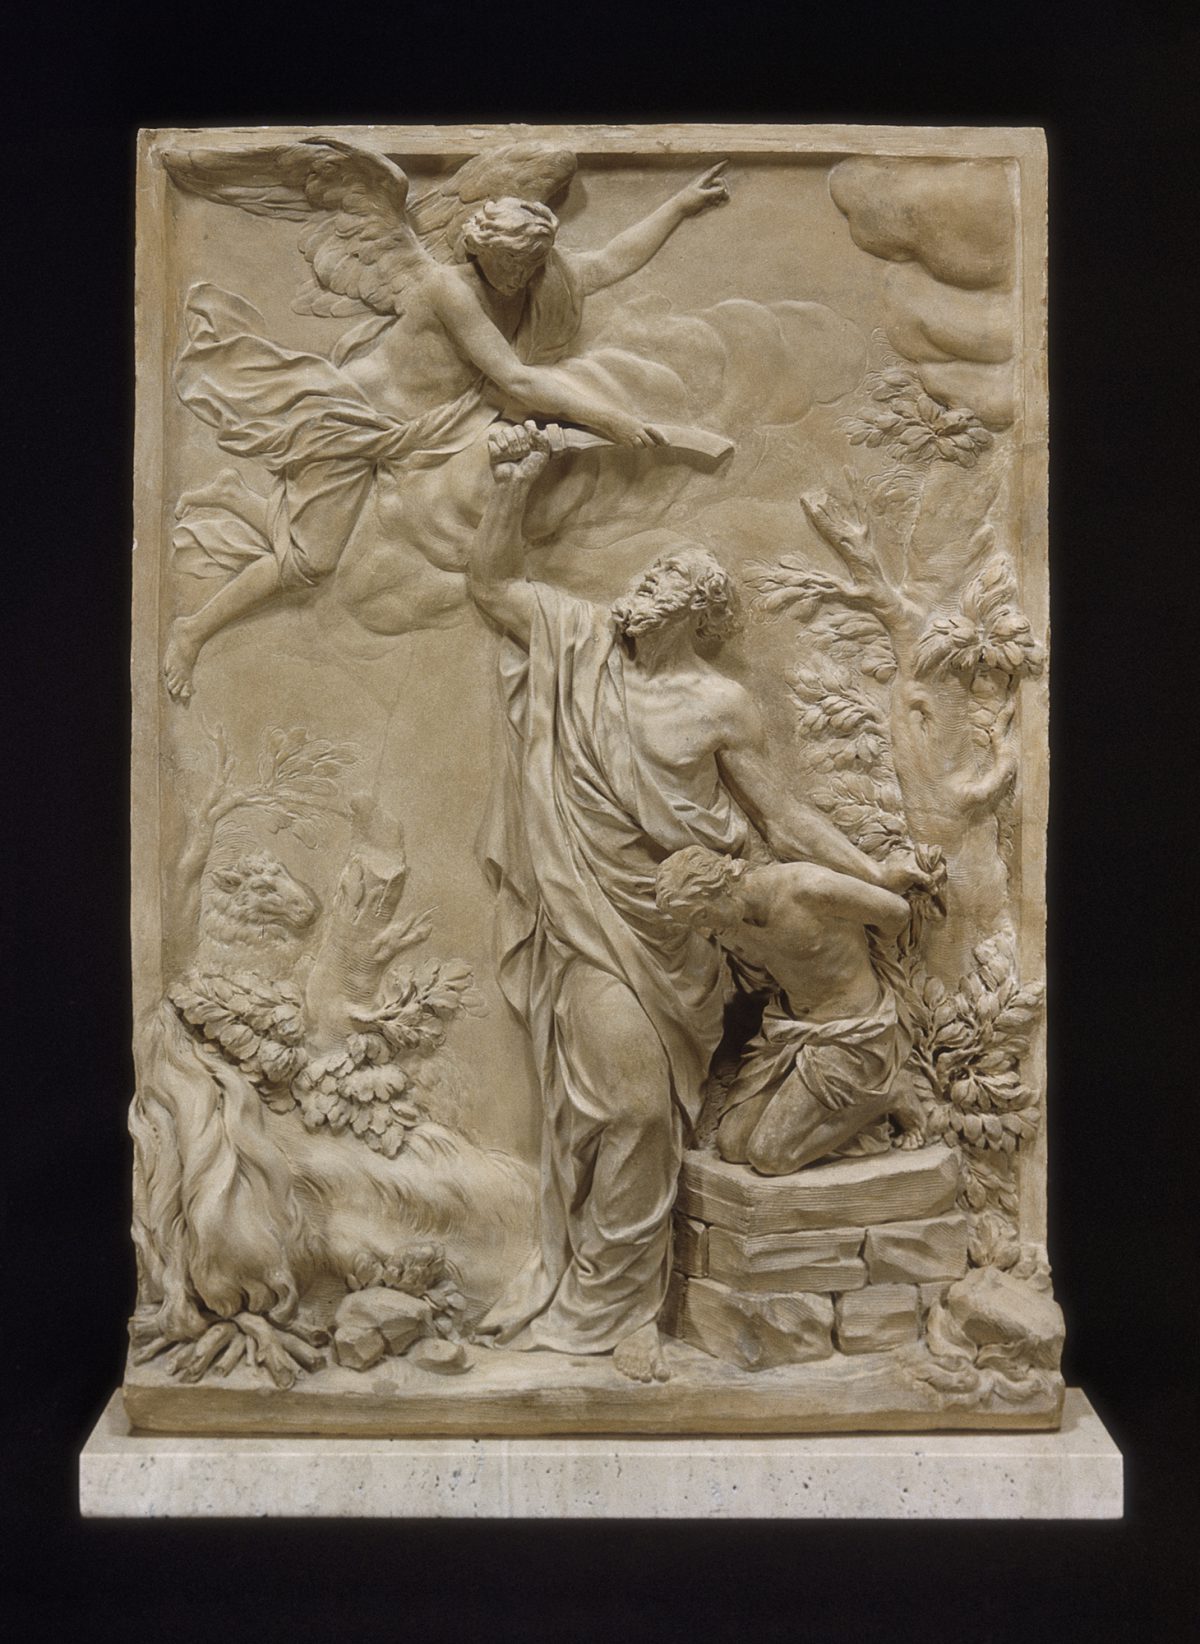 Object of the Week: The Sacrifice of Isaac